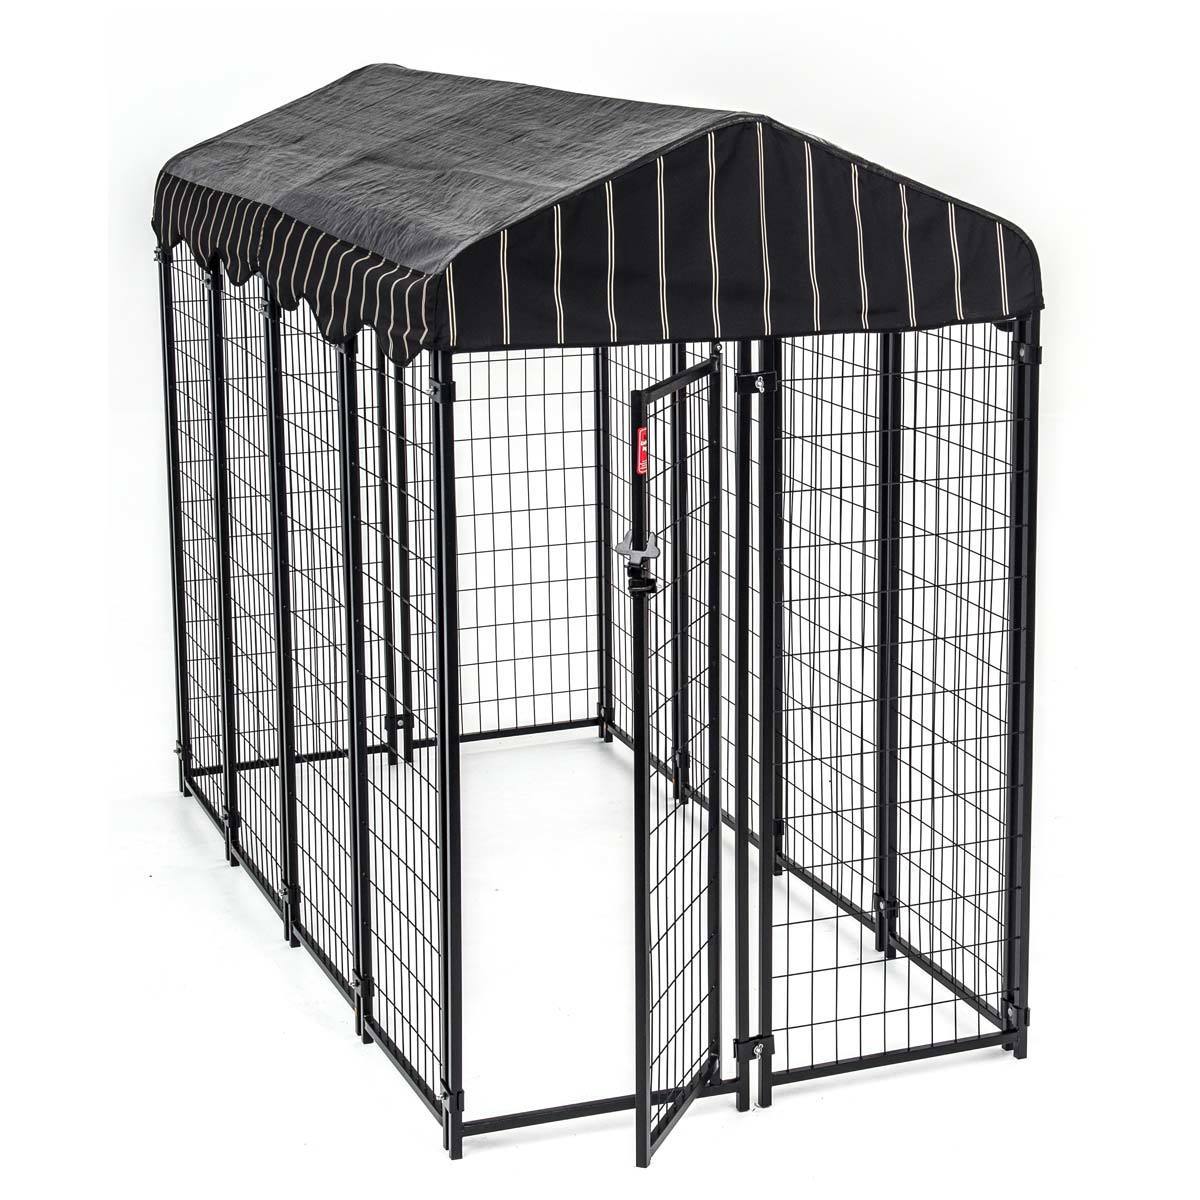 Outdoor Kennel with Weatherproof Cover, 7.8 L x 3.9 W x 5ft H (2.4 L x 1.2 W x 1.52m H)